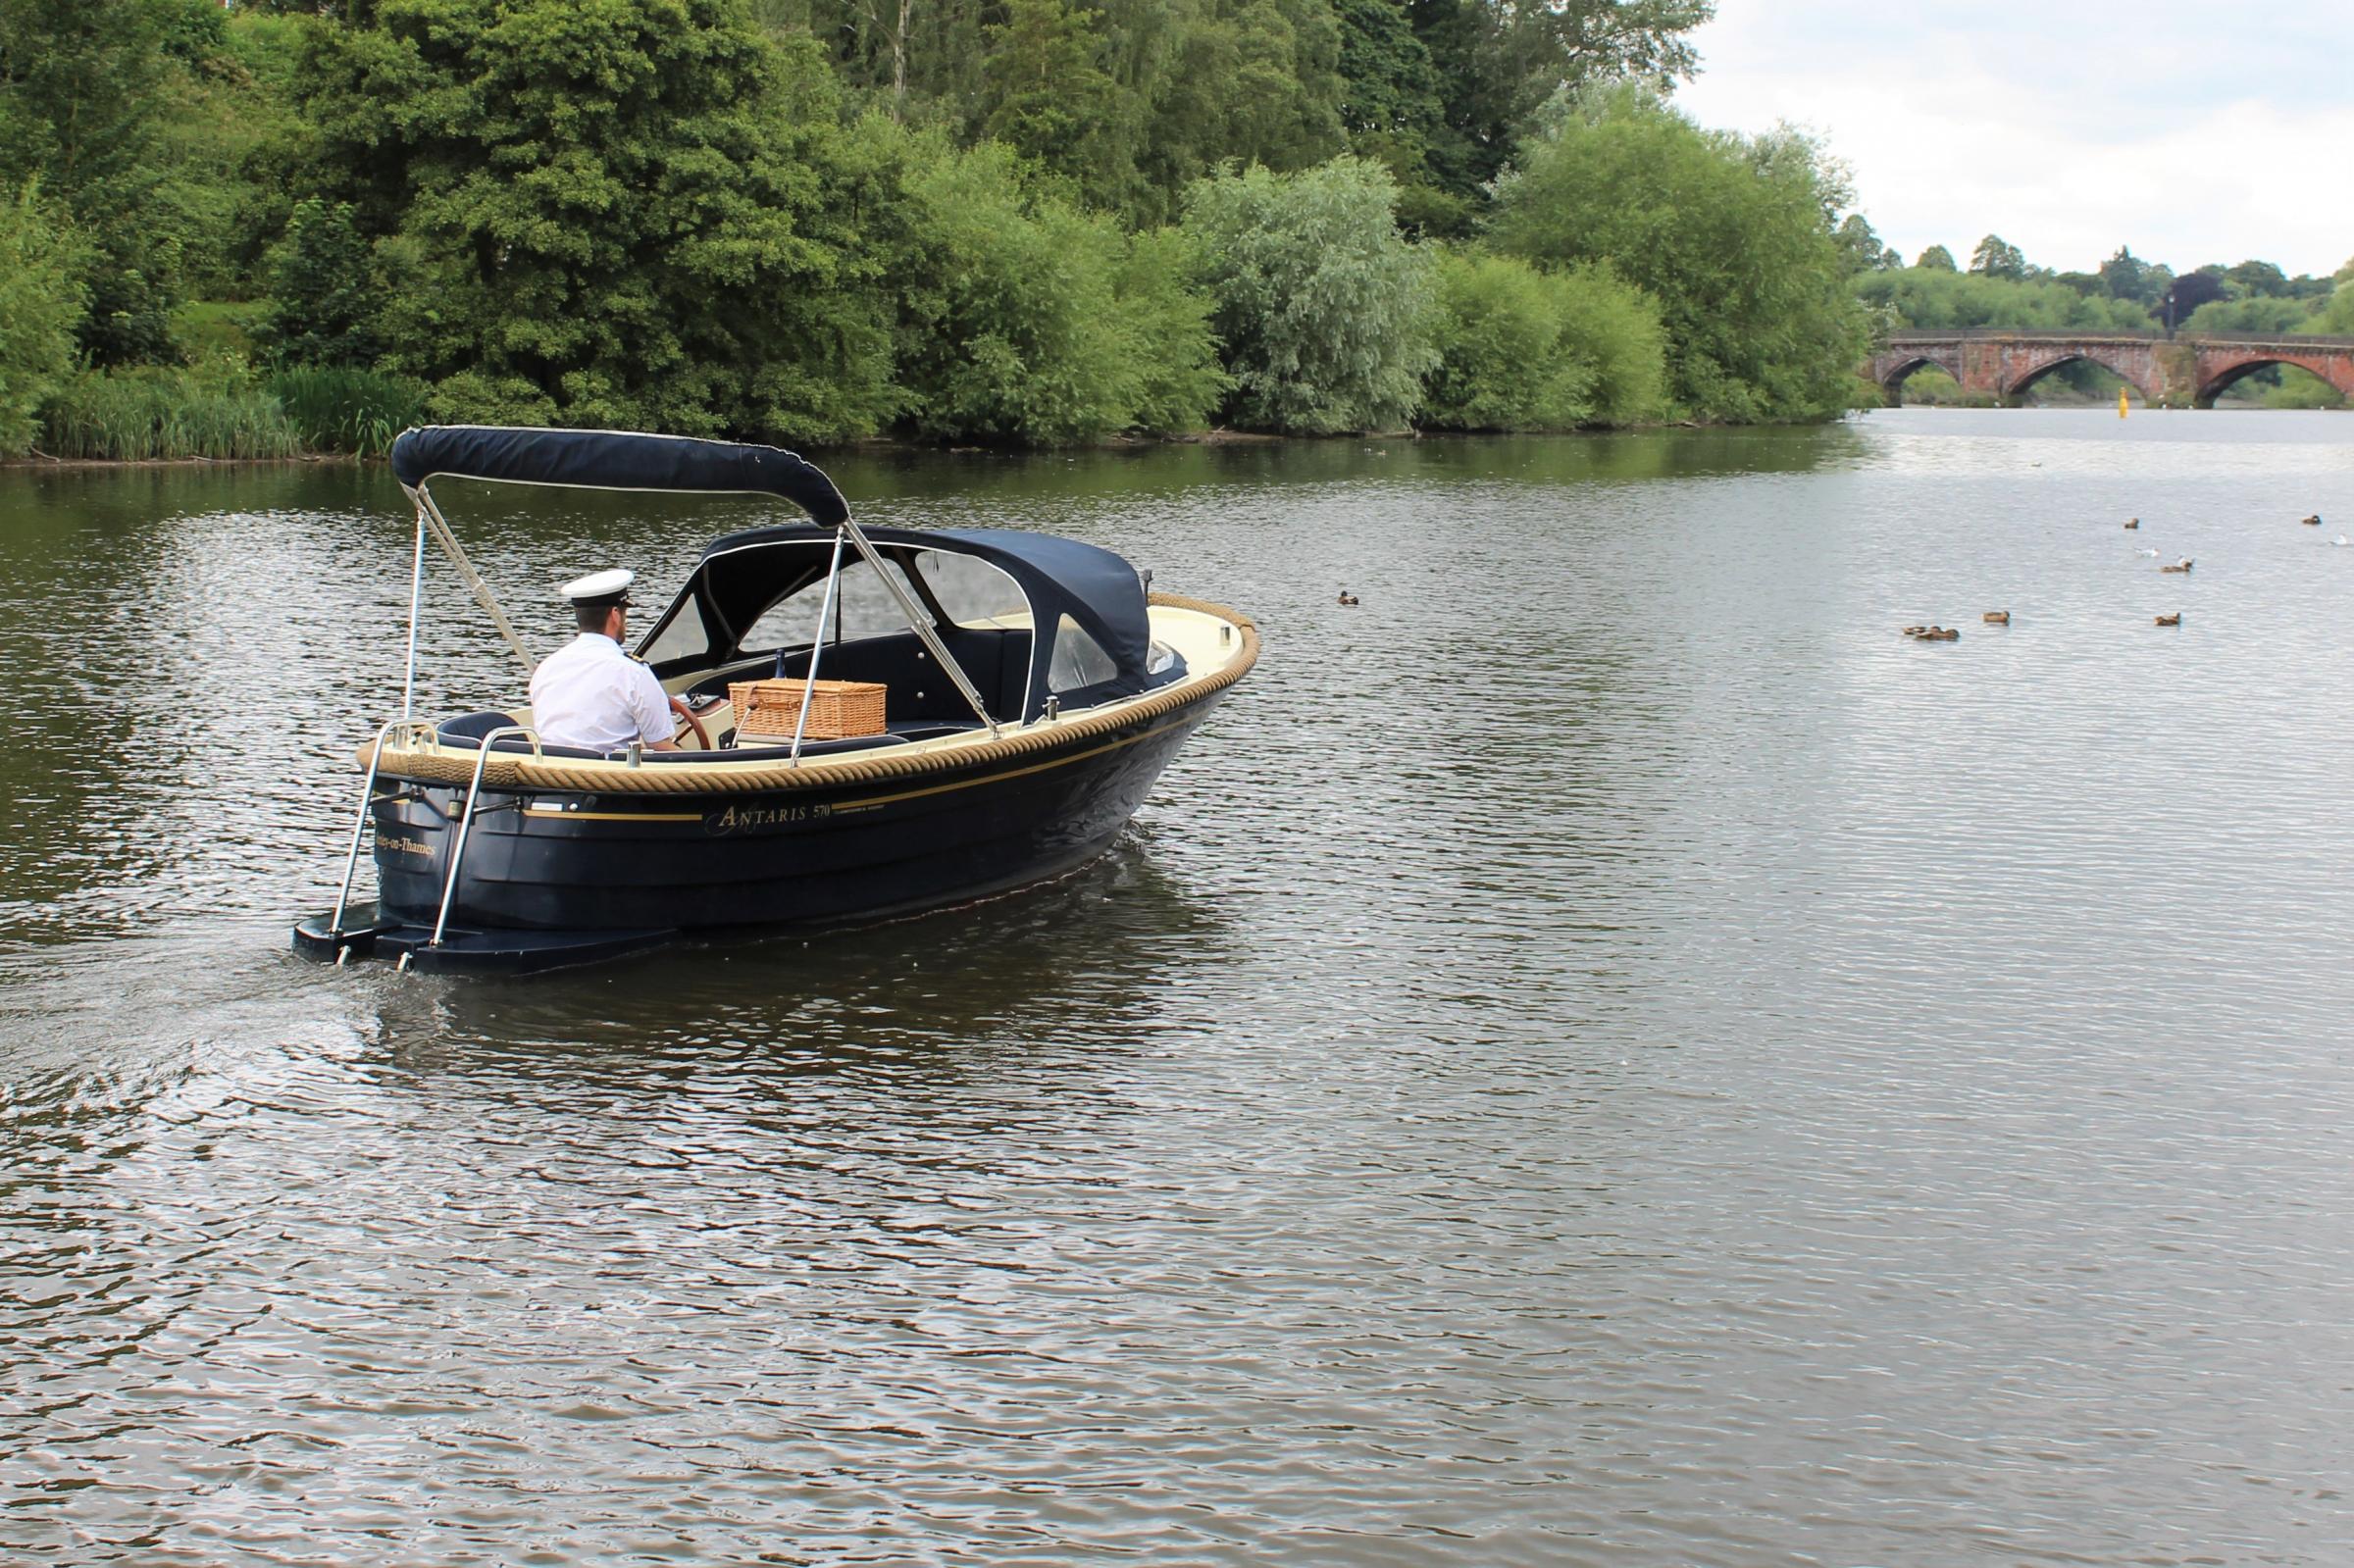 Chester Boat is hosting new private picnics on the river for up to six passengers.